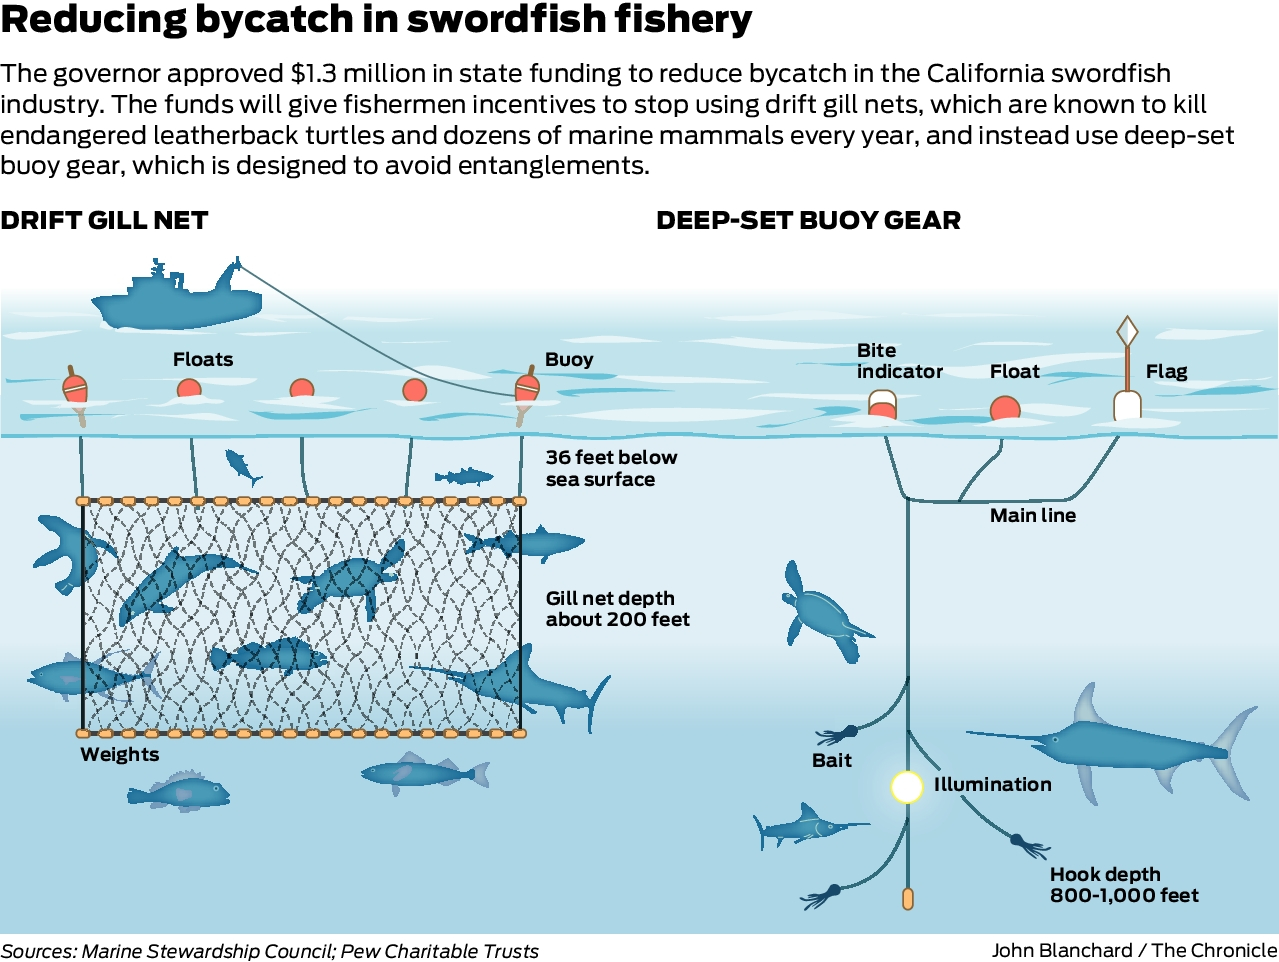 California puts up $1.3 million to phase out swordfish nets that